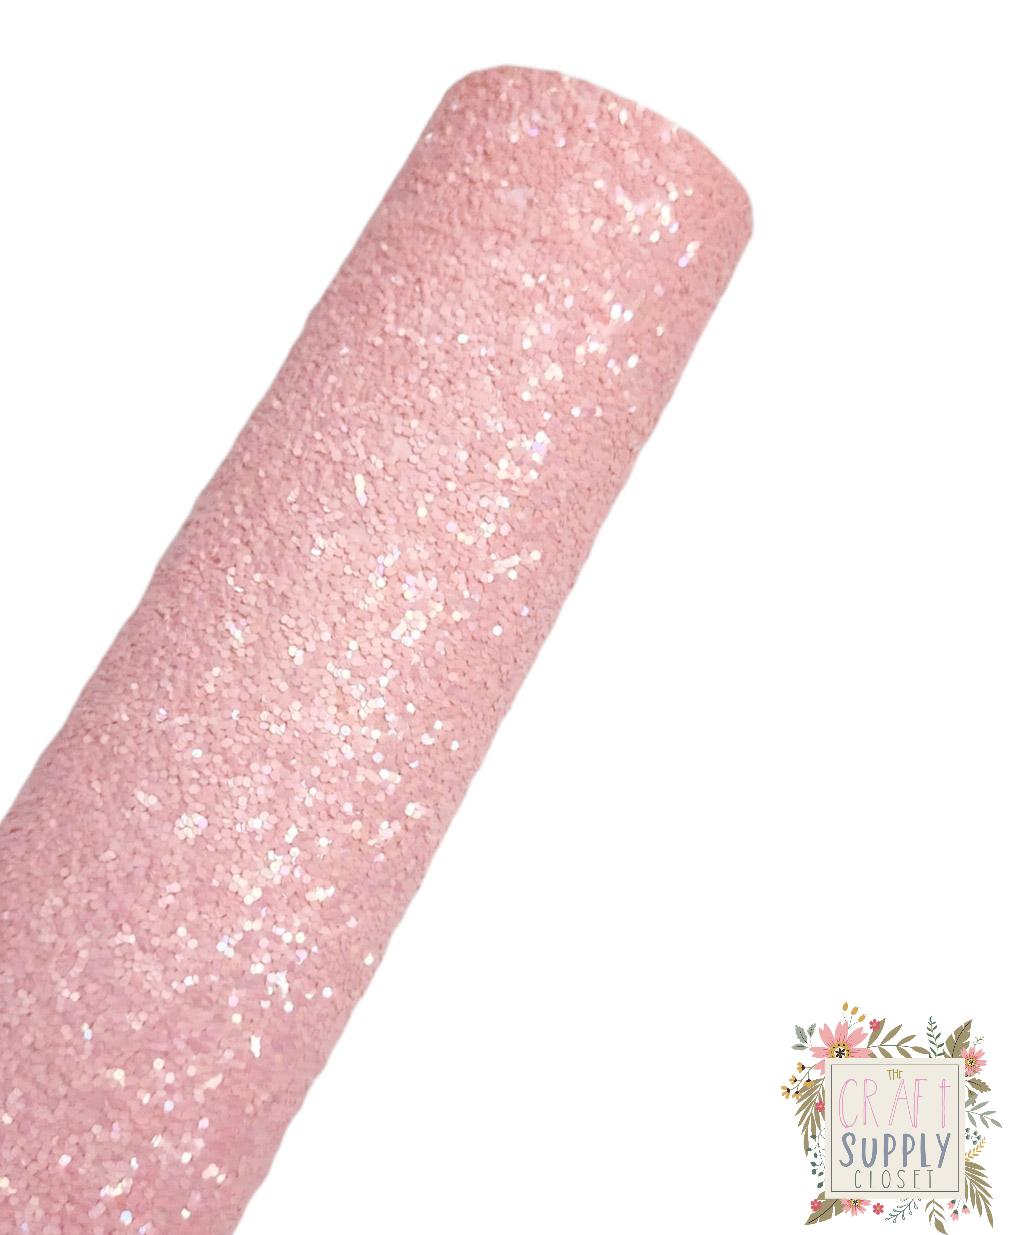 Baby Pink Chunky Glitter 9x12 faux leather sheet